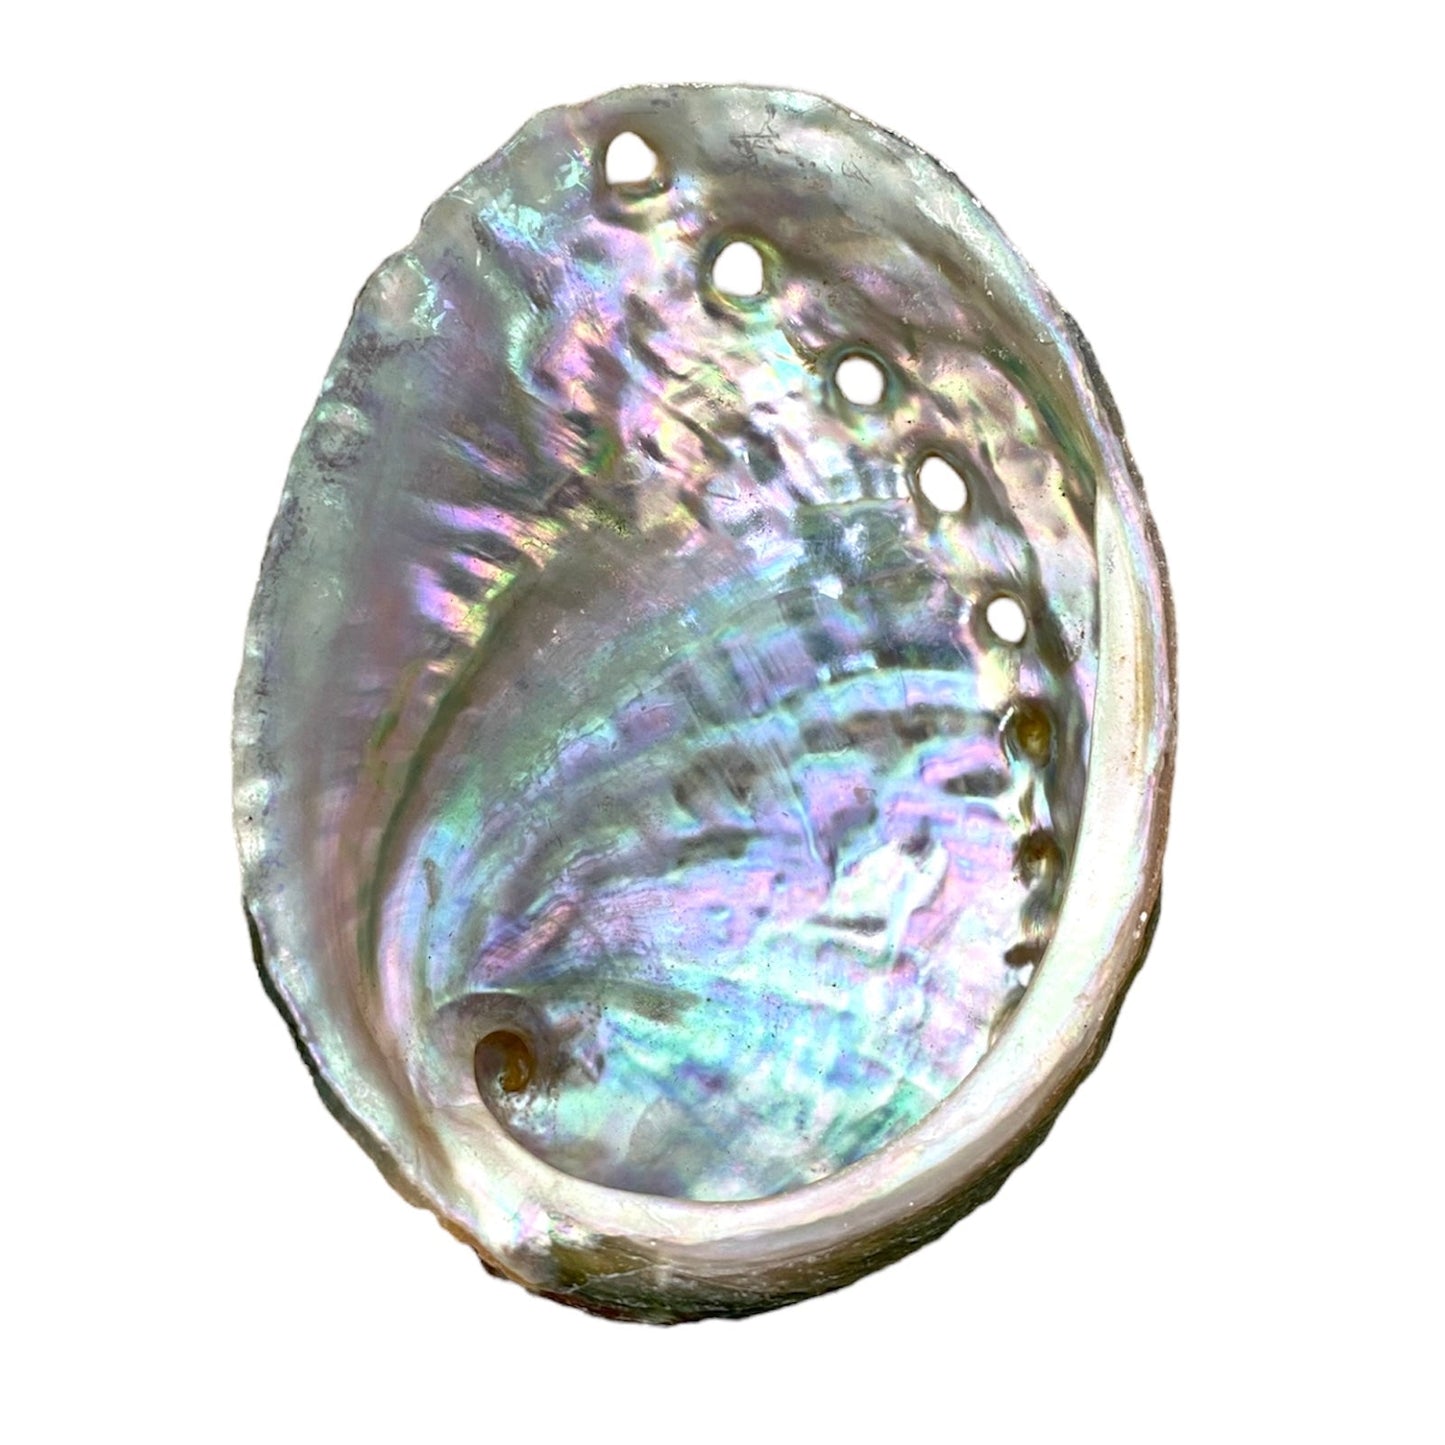 NessaStores 175 Abalone Shells 2.5 to 3.5 Inches | Beautiful All Natural Smudge Bowl - Perfect for Smudge Sticks, Incense Sticks and a Sage Smudge Kit. #JC-020